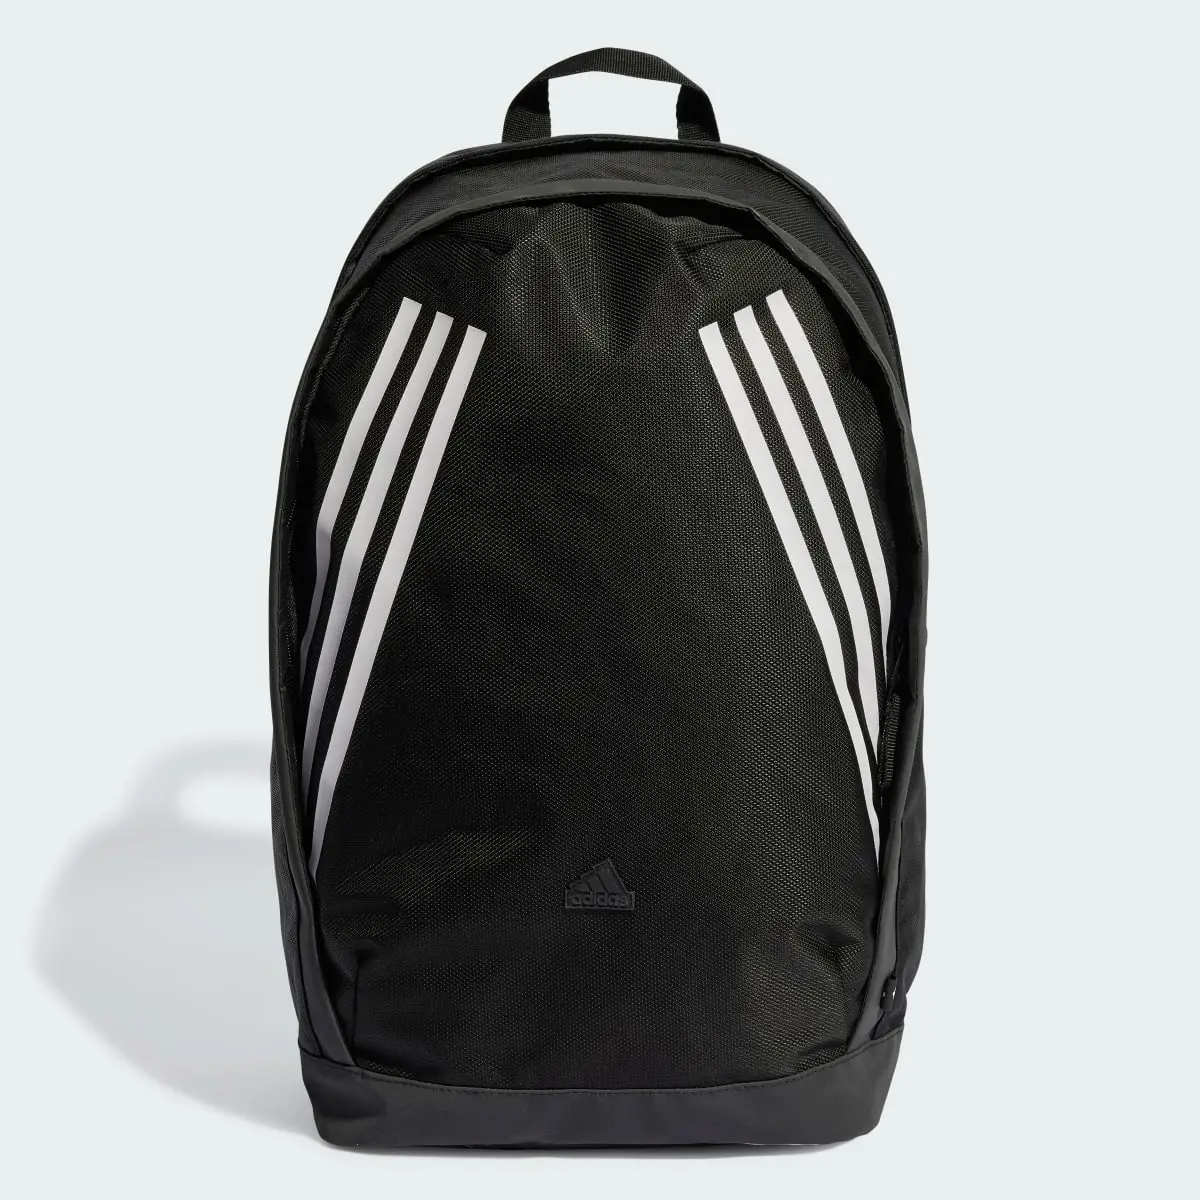 Adidas Future Icons Backpack. 2